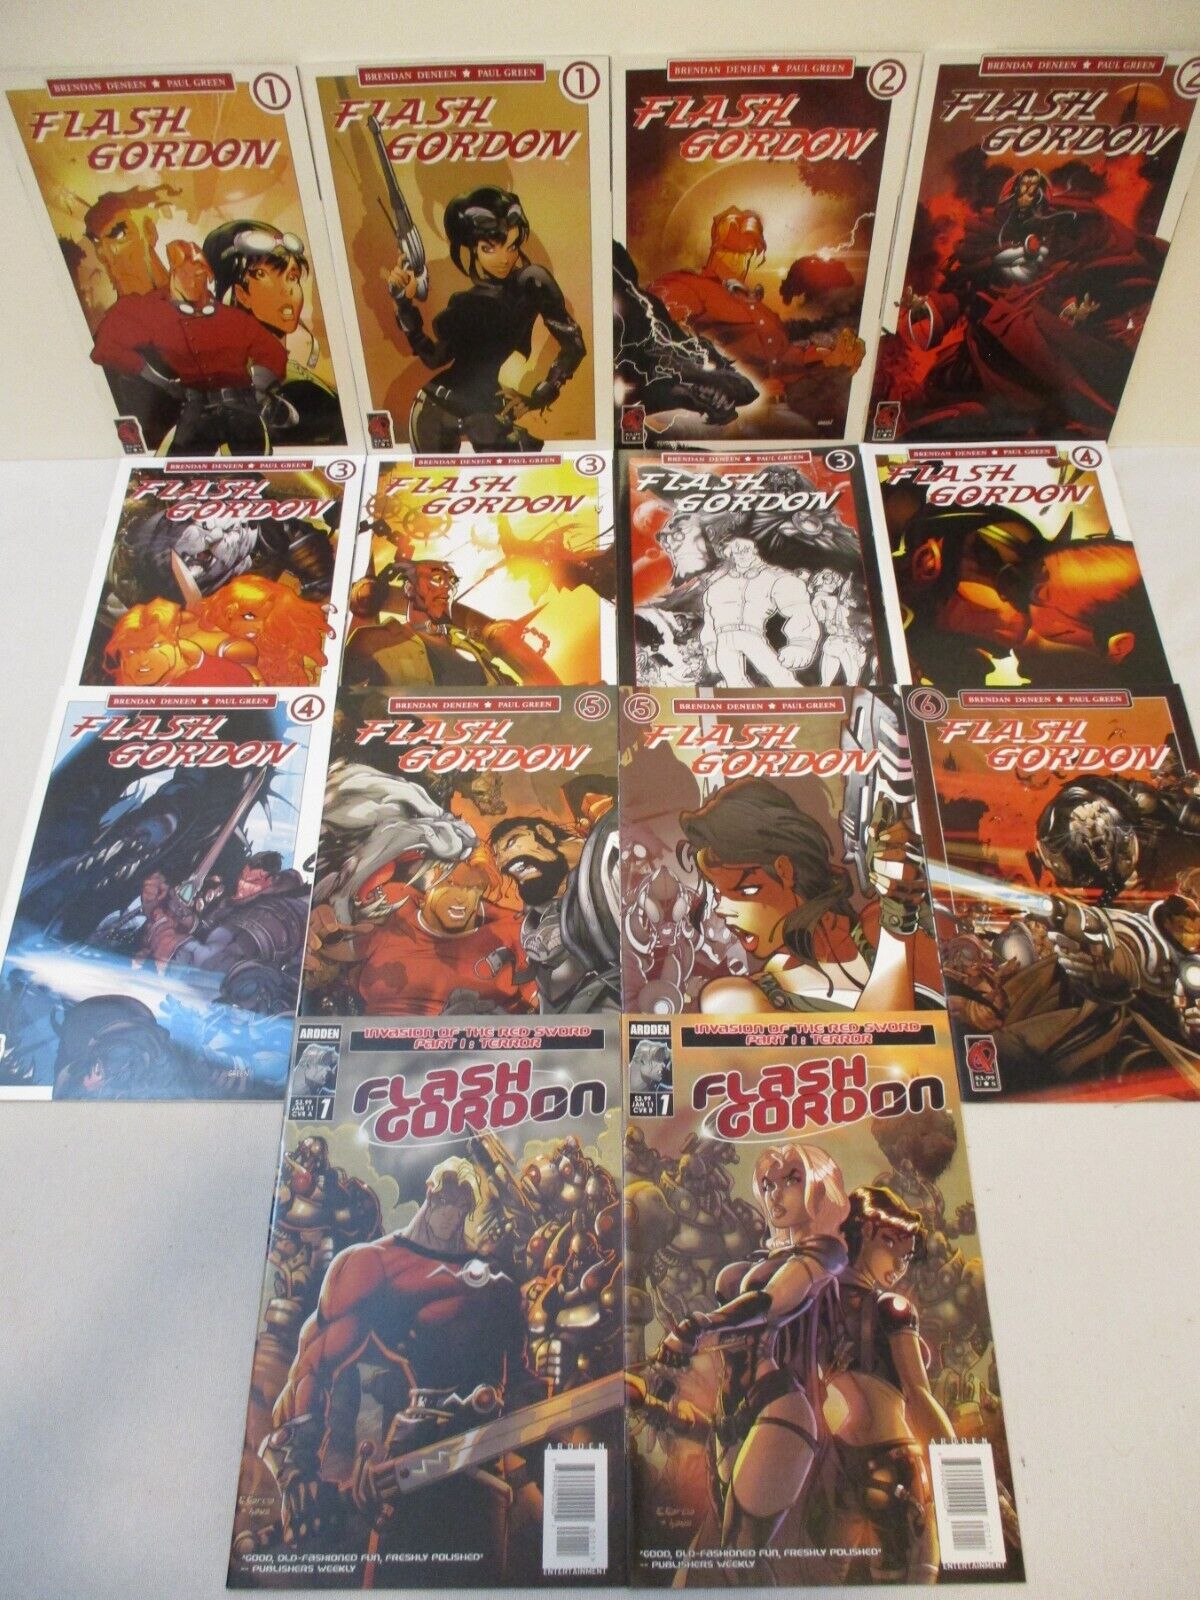 Flash Gordon #1 - 6 with some Variants, Red Sword #1 - Ardden Entertainment 2008